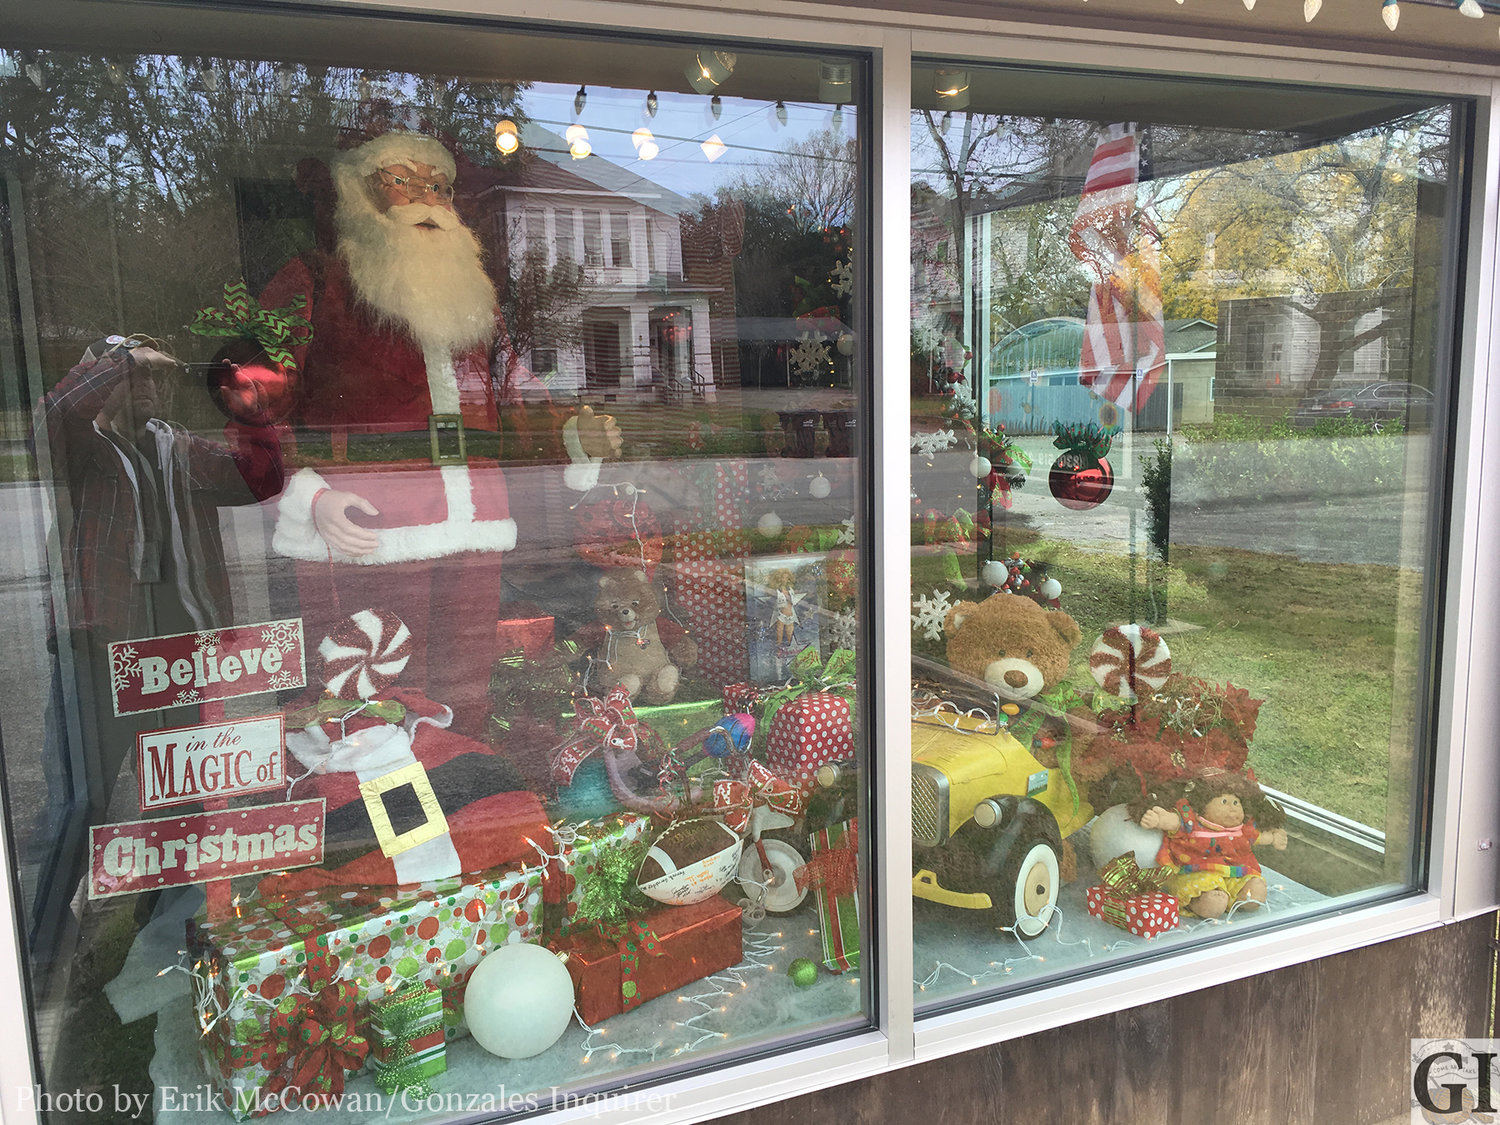 Winterfest organizers have created a little something extra to go along with this weekend's Winterfest celebration. Several businesses have gotten on board with the window decorating contest, and BZ's Country Pedals has gone all out with Santa Claus and a classic display of 80s must-have toys. It's not clear if Santa had these left over from his stash or not.